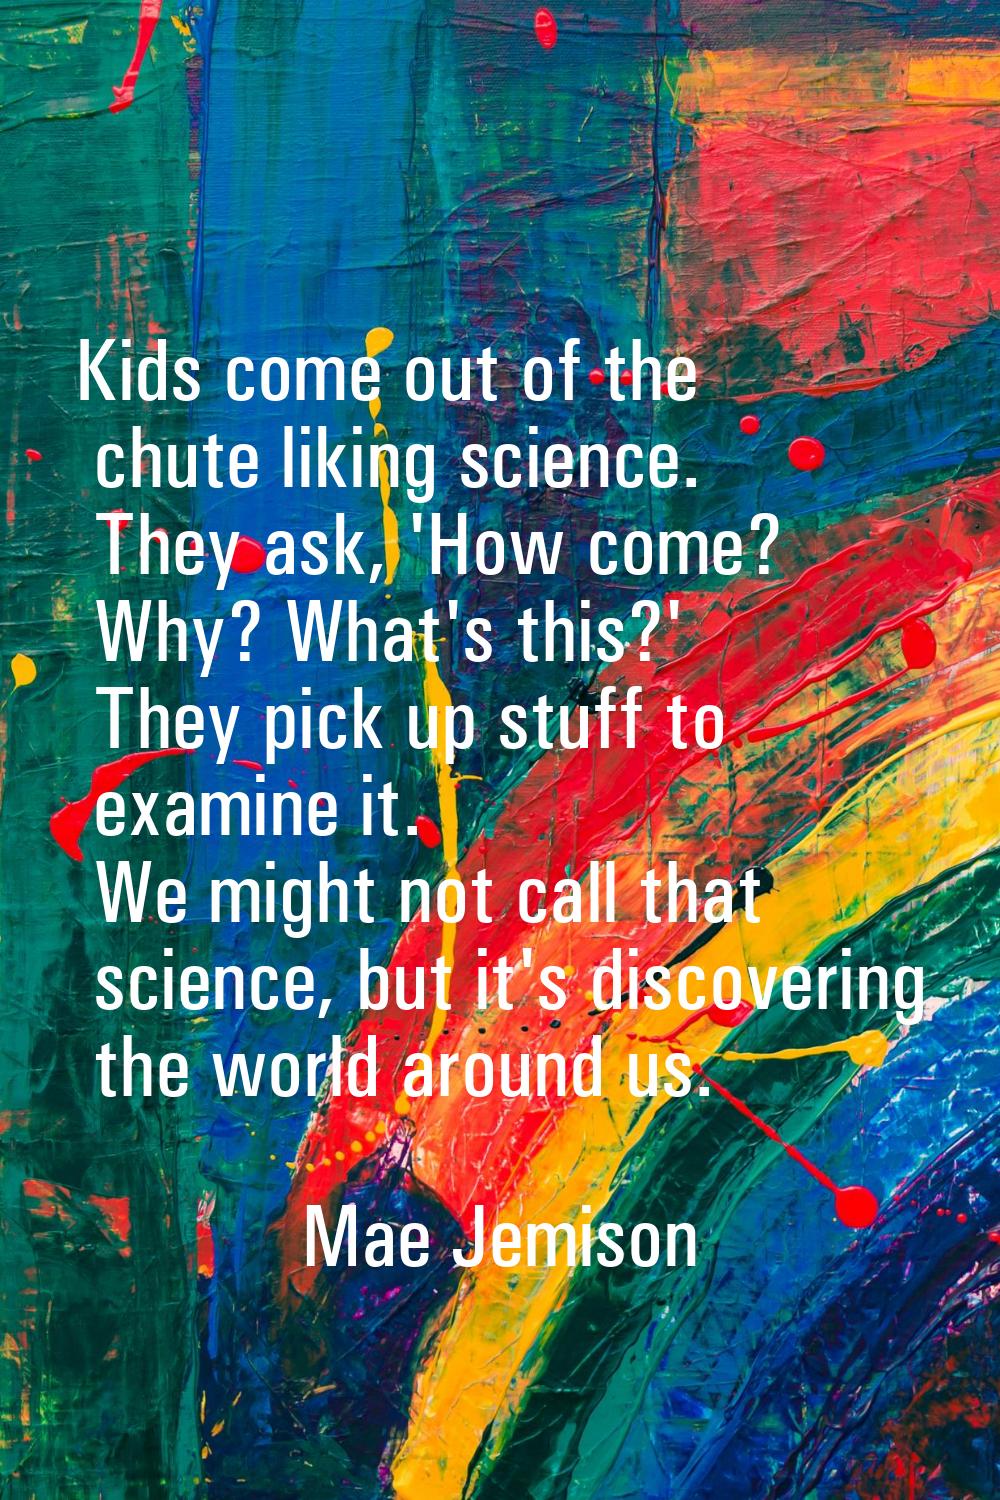 Kids come out of the chute liking science. They ask, 'How come? Why? What's this?' They pick up stu